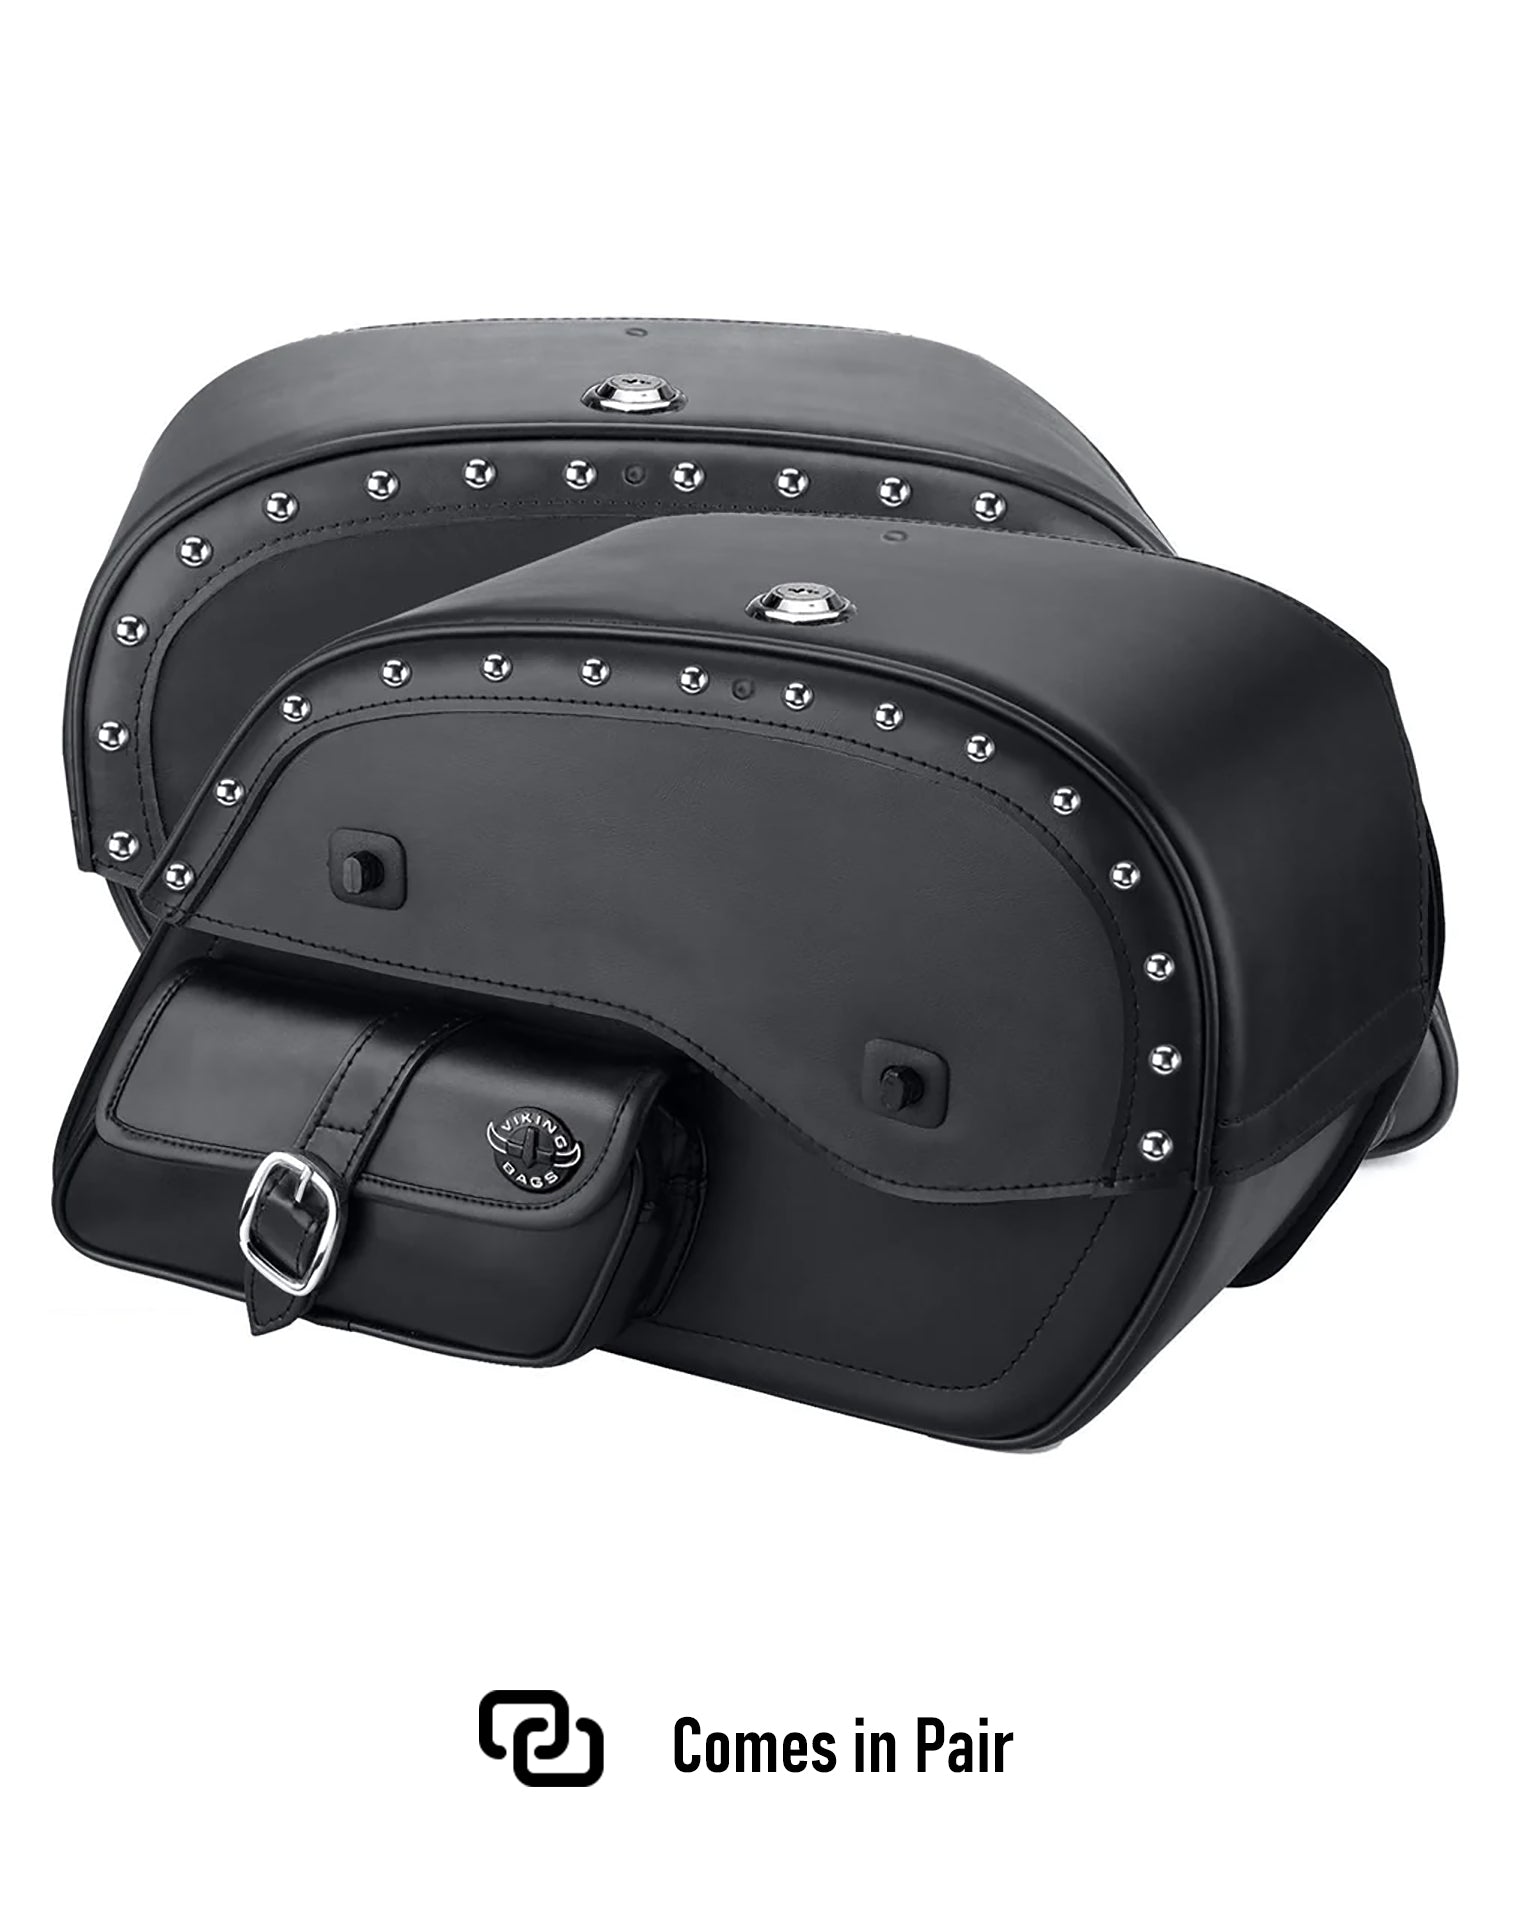 Viking Side Pocket Large Studded Triumph Thunderbird Leather Motorcycle Saddlebags Comes in Pair